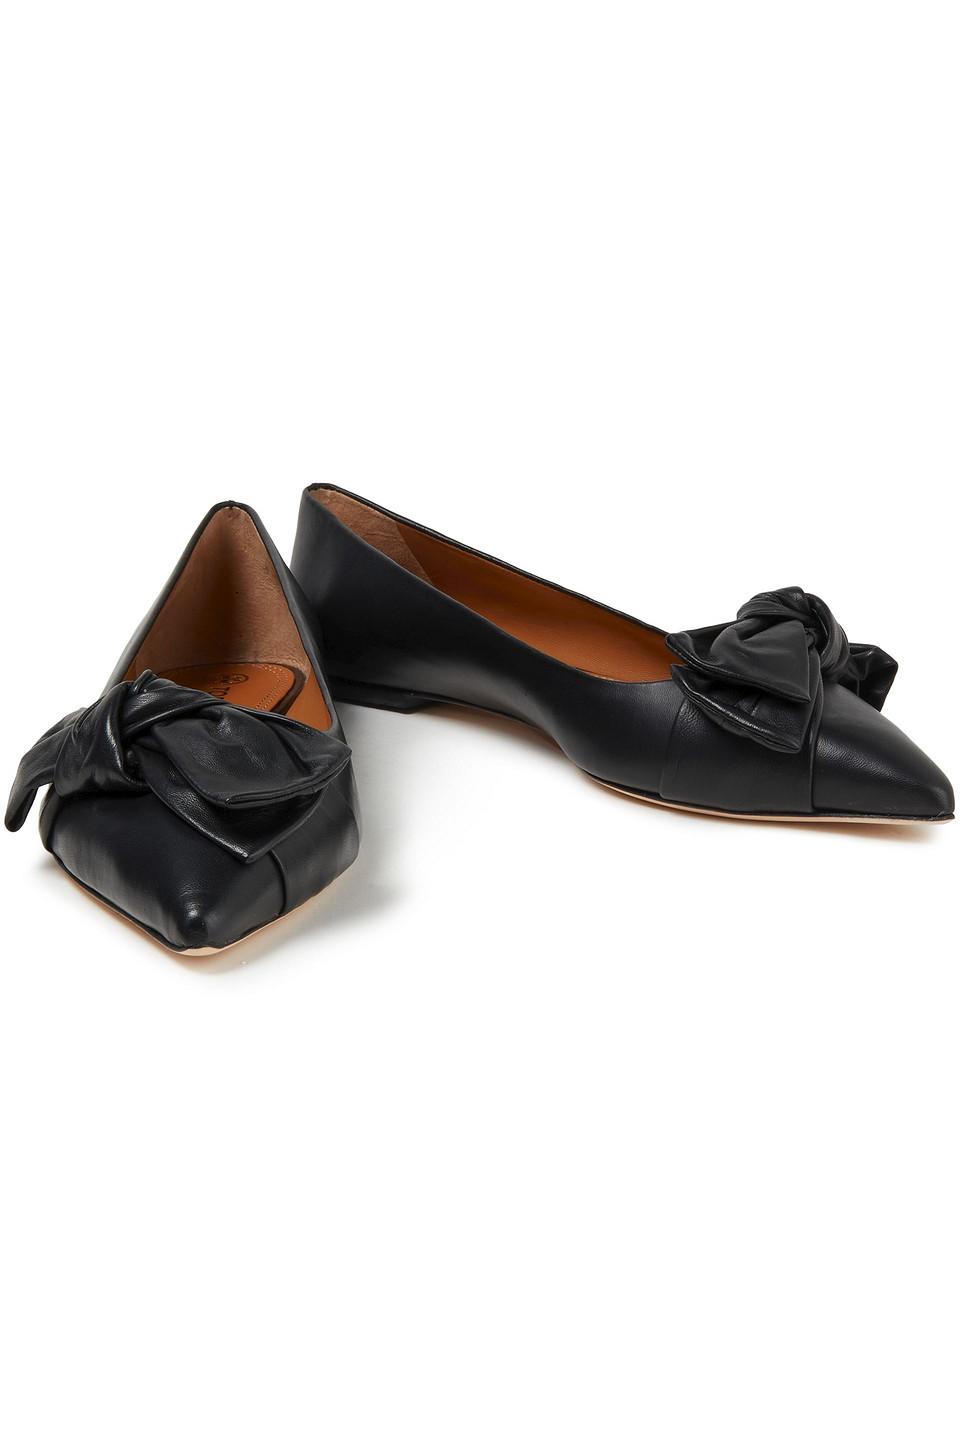 Tory Burch Bow-embellished Leather Point-toe Flats in Black | Lyst Canada